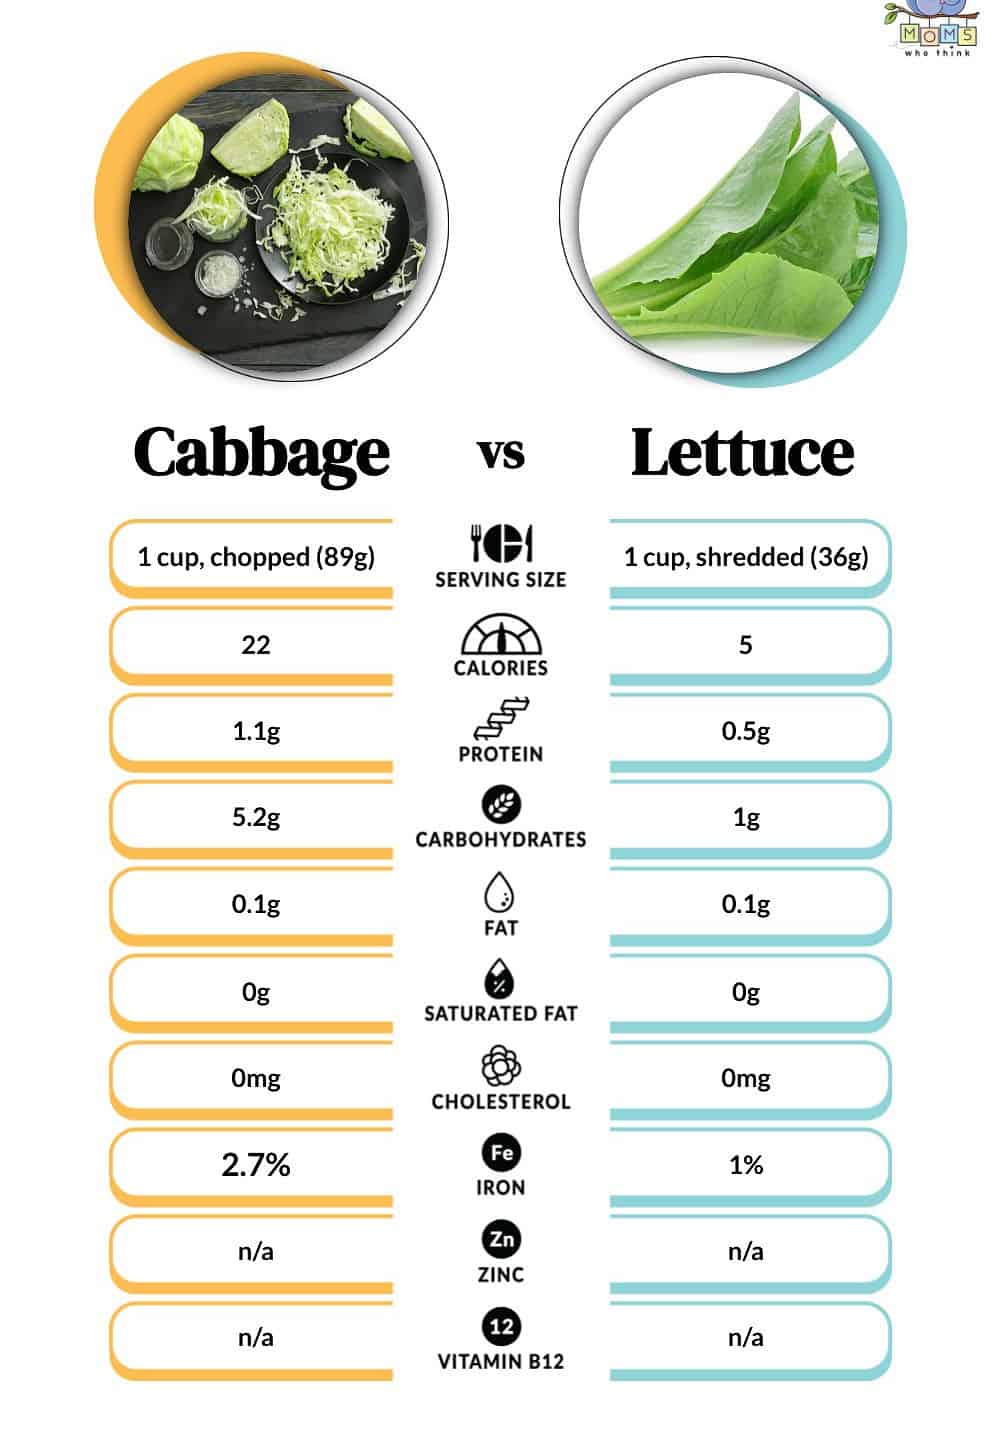 Cabbage vs Lettuce Nutritional Facts